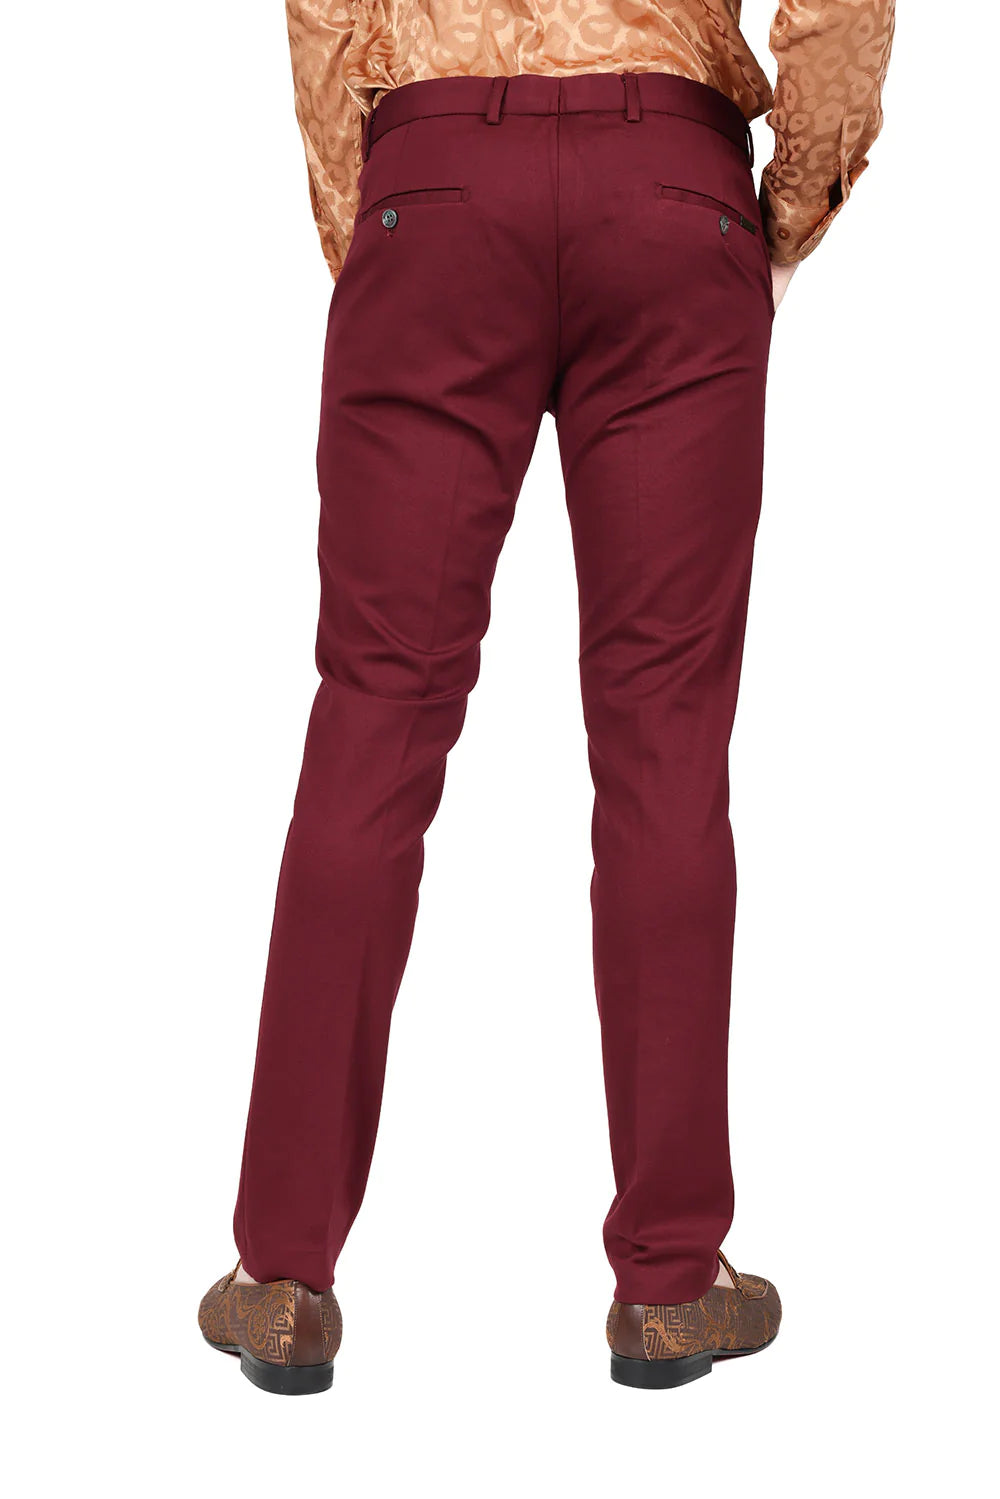 Barabas Men's Solid Color Basic Essential Chino Dress Pants